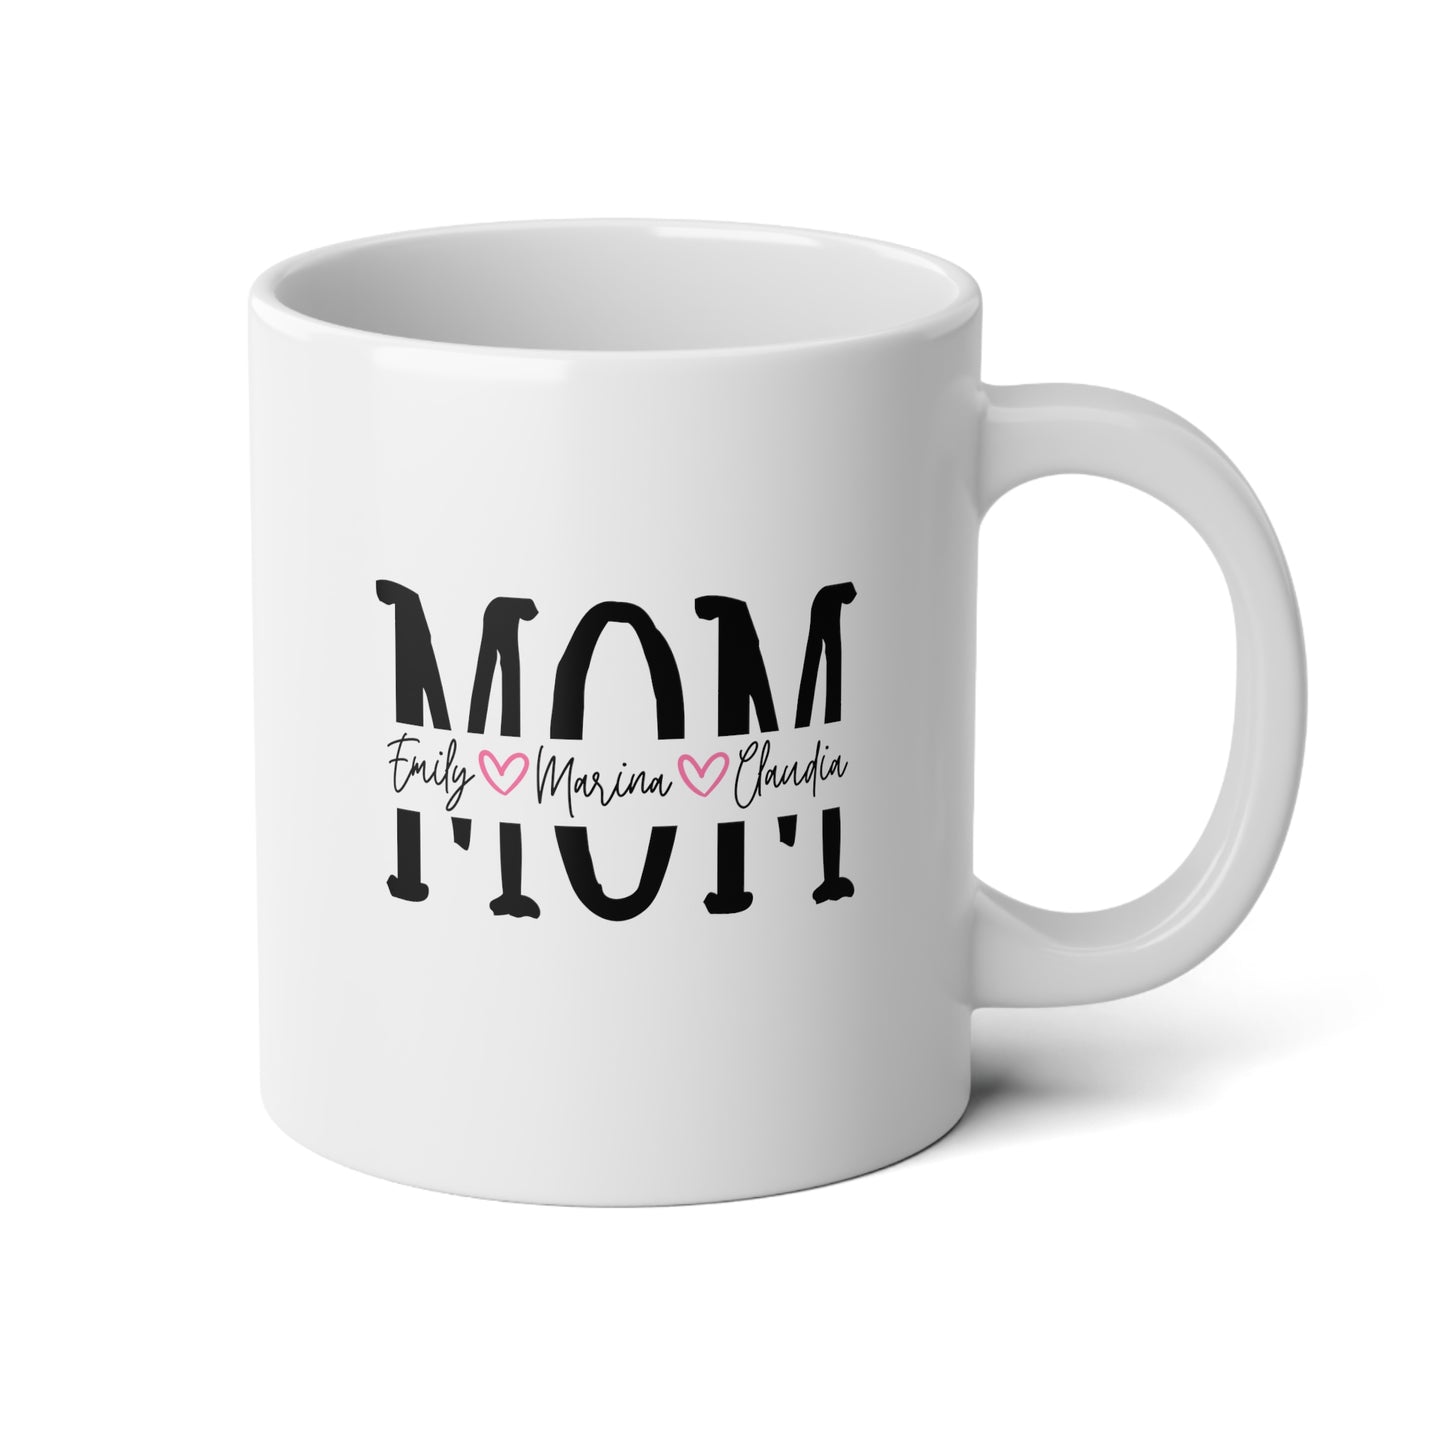 Mom With Kids' Names 20oz white funny large coffee mug gift for mother's day son daughter heart personalize custom waveywares wavey wares wavywares wavy wares